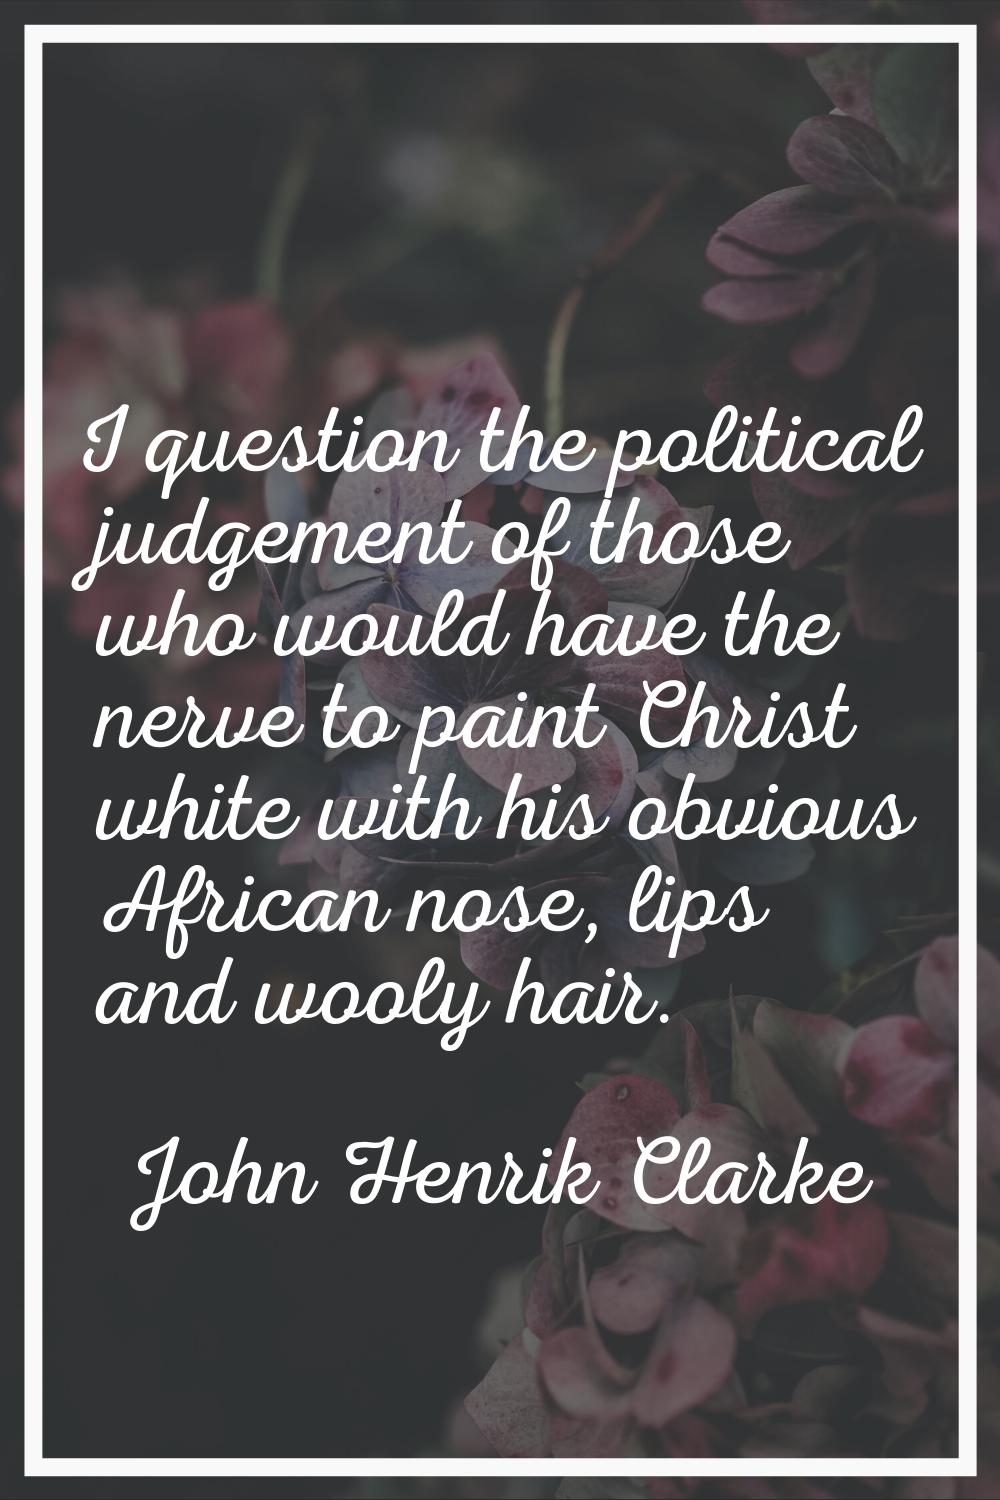 I question the political judgement of those who would have the nerve to paint Christ white with his